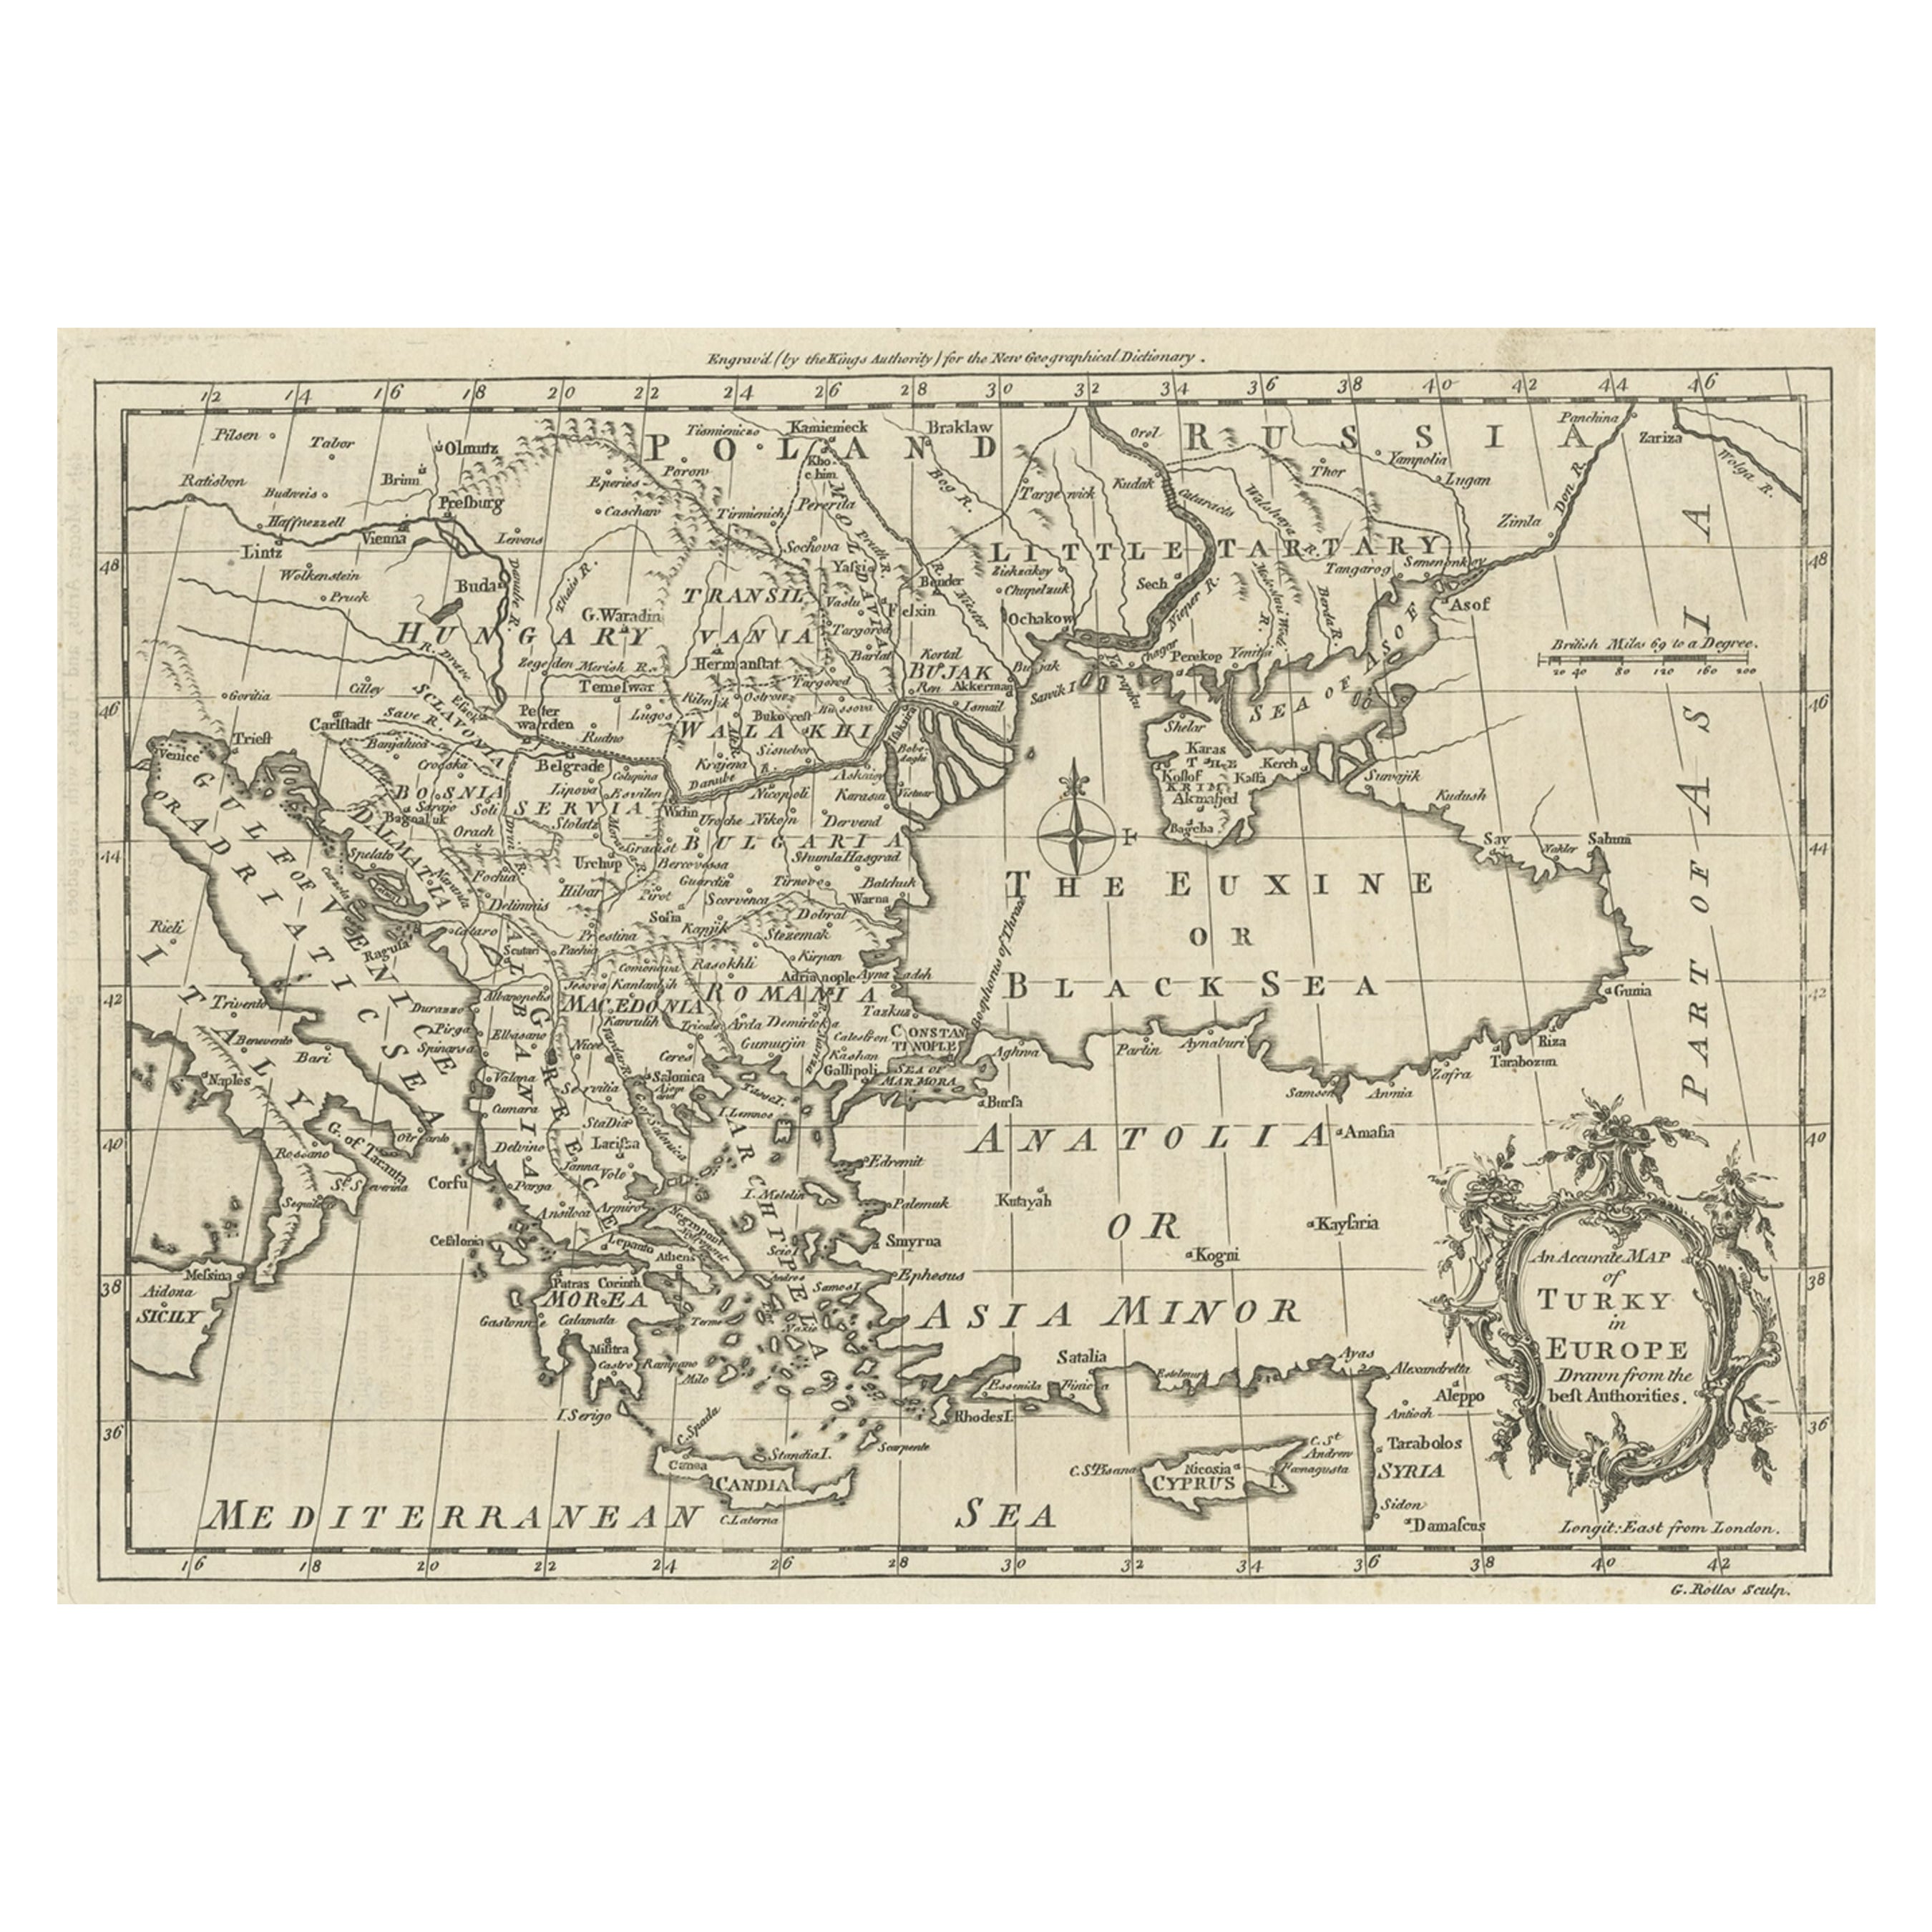 Map of the Ottoman Empire in Europe, incl. the Balkans, Greece & Turkey, c.1760 